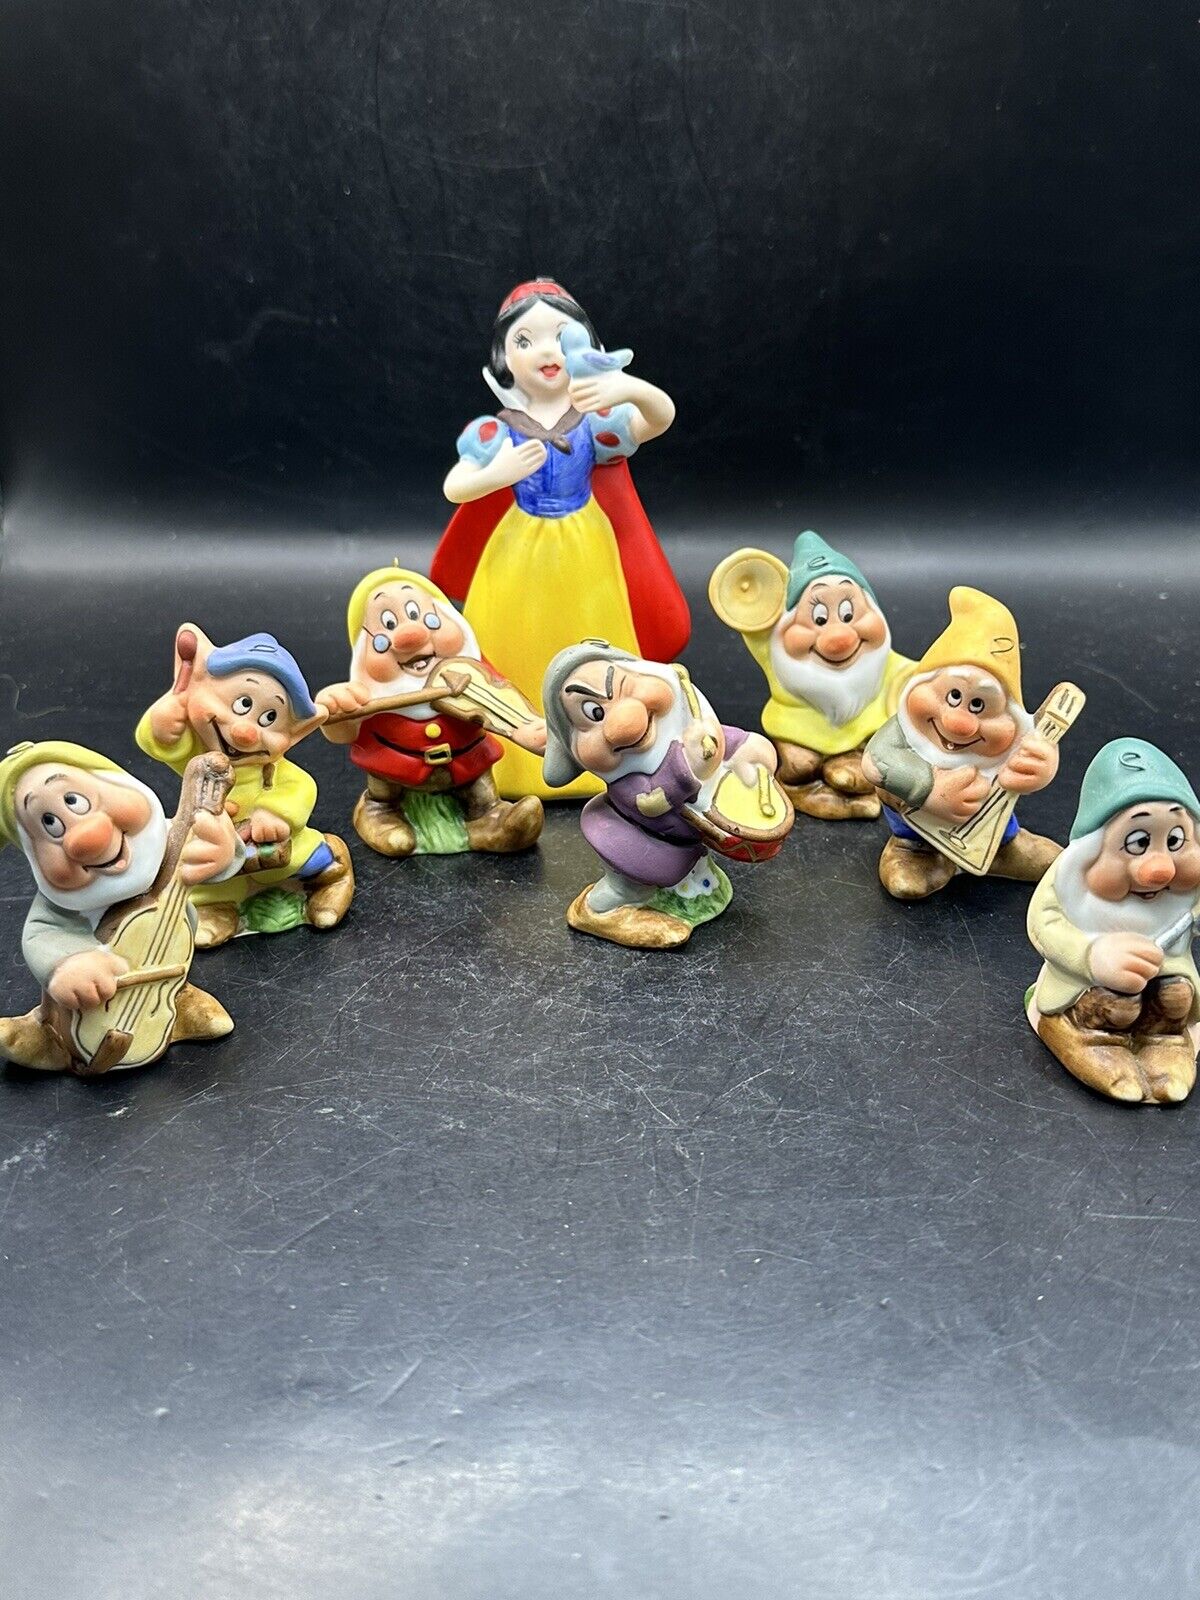 Disney's Snow White and the 7 Dwarfs figurines by Schmid RARE